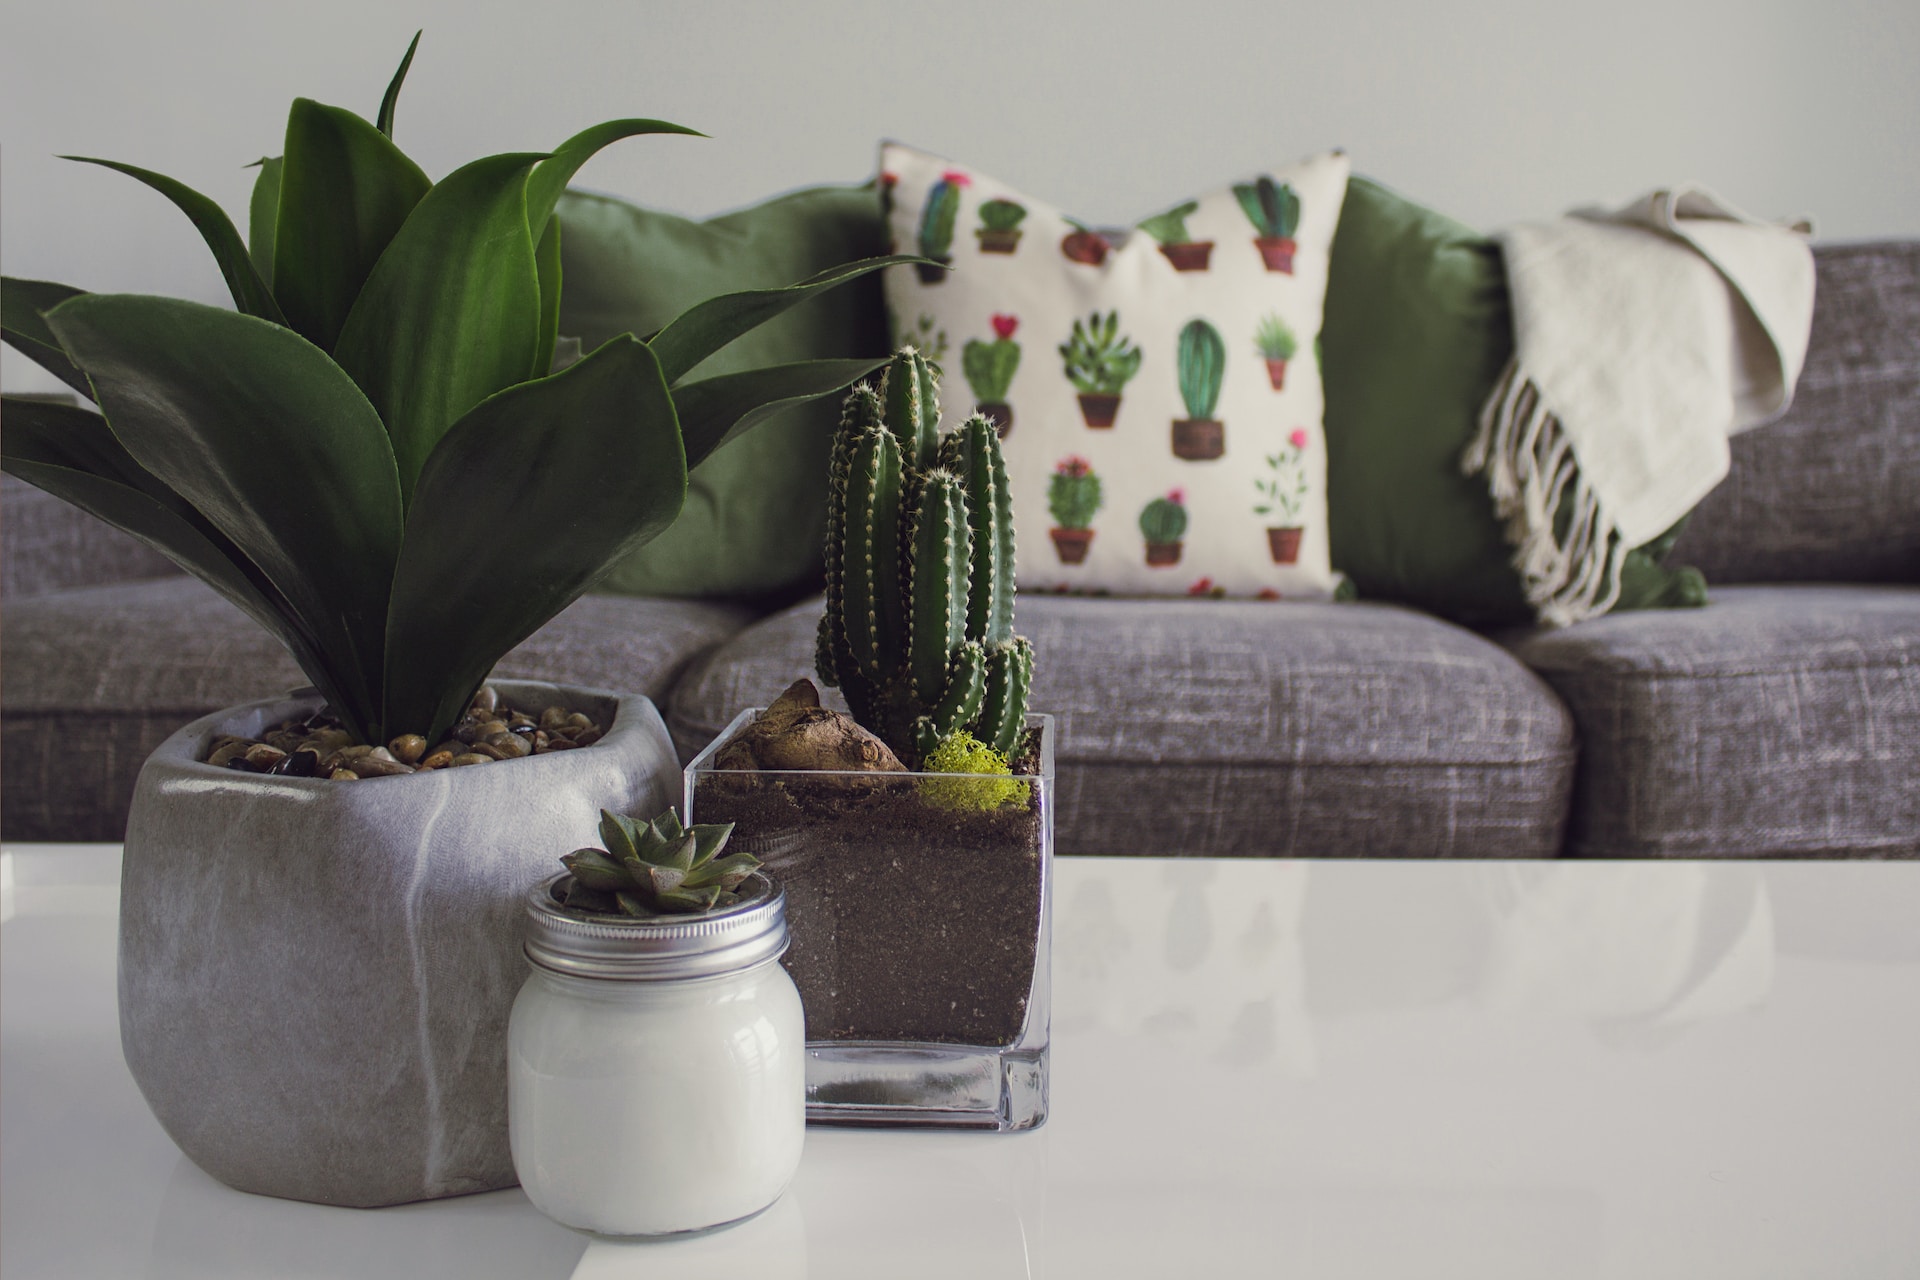 plants on a table, sofa in the background